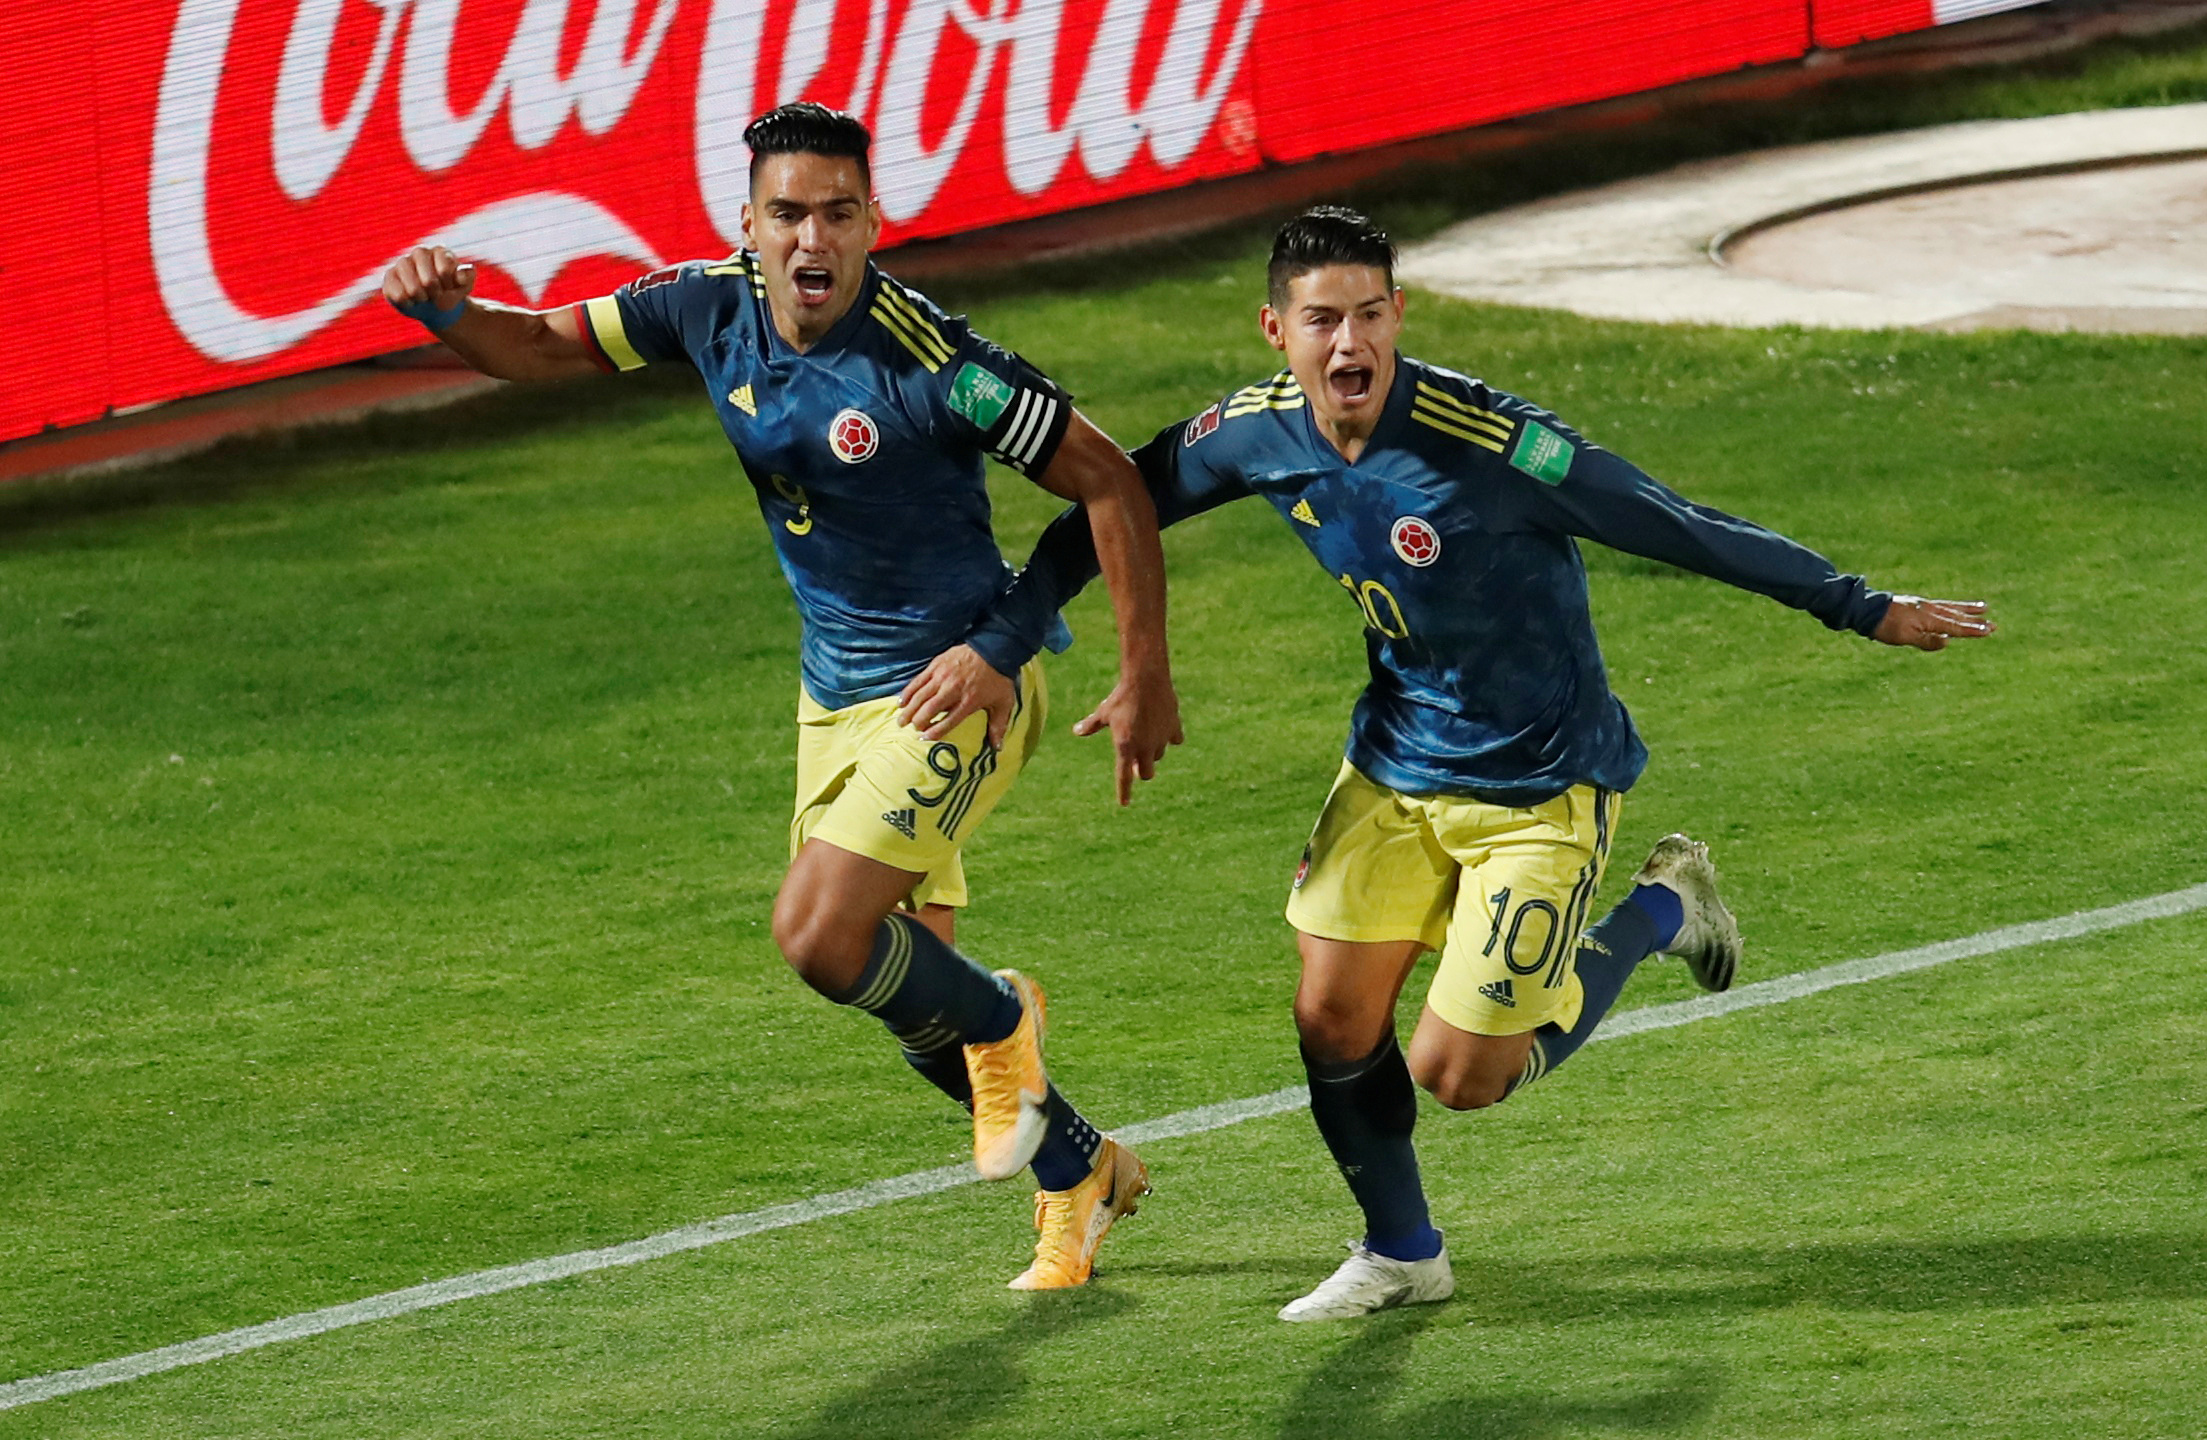 Soccer Football - World Cup 2022 South American Qualifiers - Chile v Colombia - Estadio Nacional, Santiago, Chile - October 13, 2020  Colombia's Radamel Falcao celebrates scoring their second goal with James Rodriguez Alberto Valdes/Pool via REUTERS